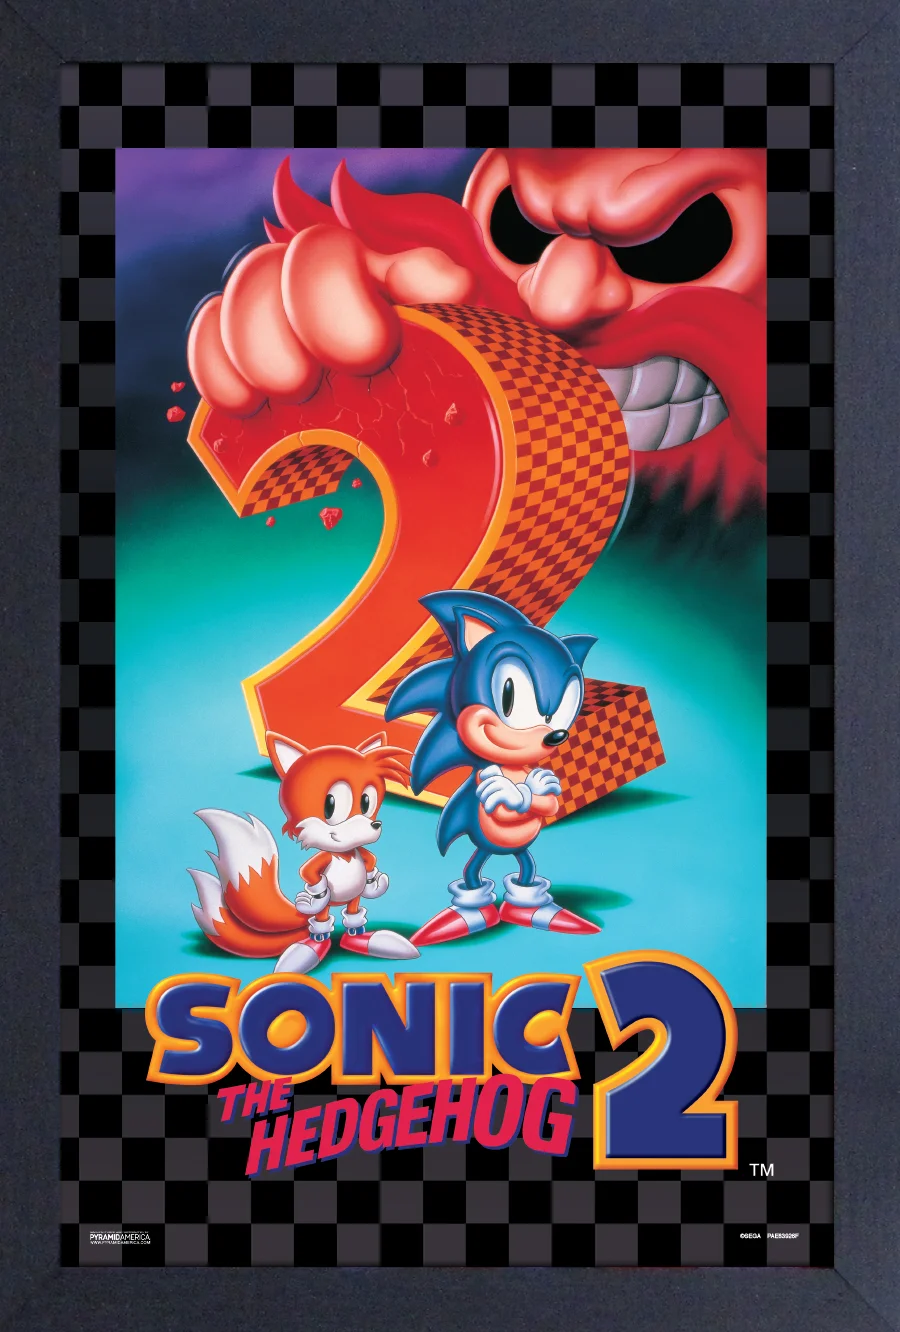 Sonic the Hedgehog - Sonic The Hedgehog 2 Cover (11"x17" Gel-Coat) (Order in multiples of 6, mix and match styles)